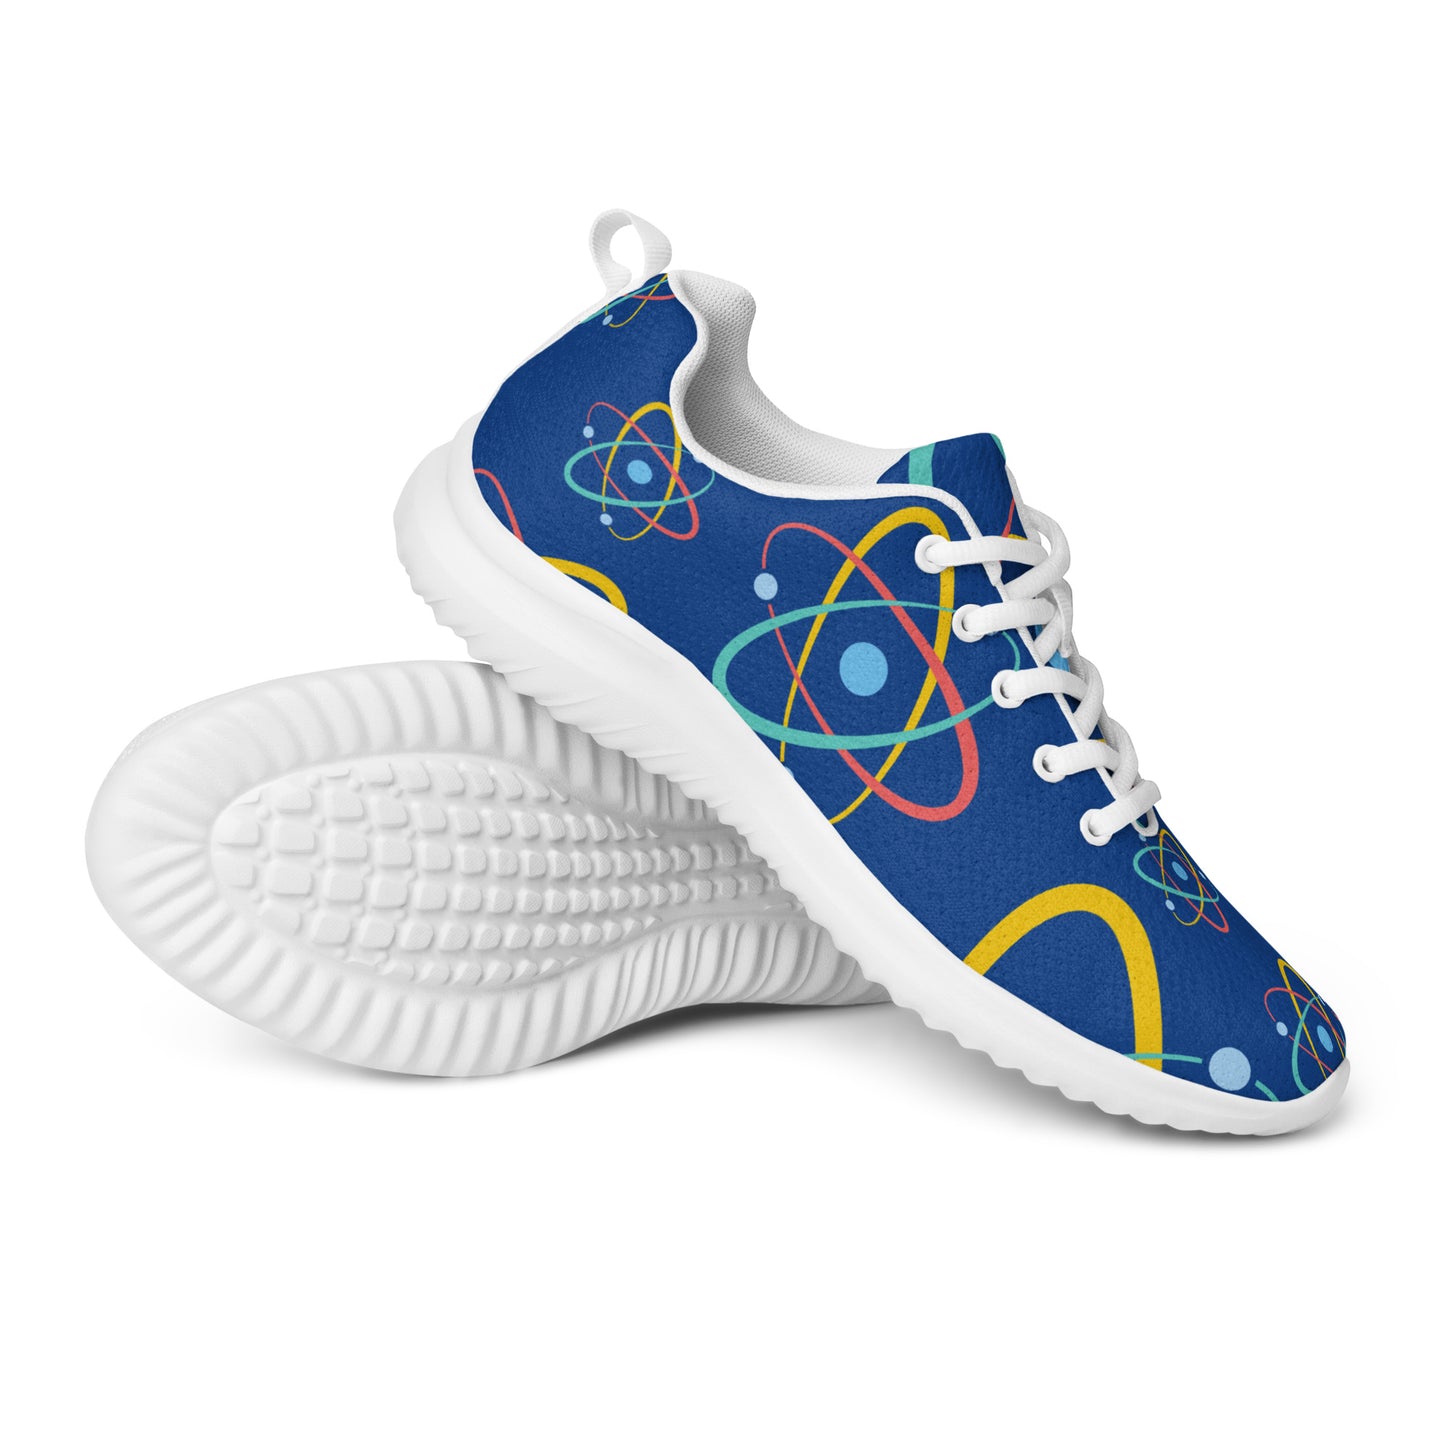 Atoms - Women’s athletic shoes Womens Athletic Shoes